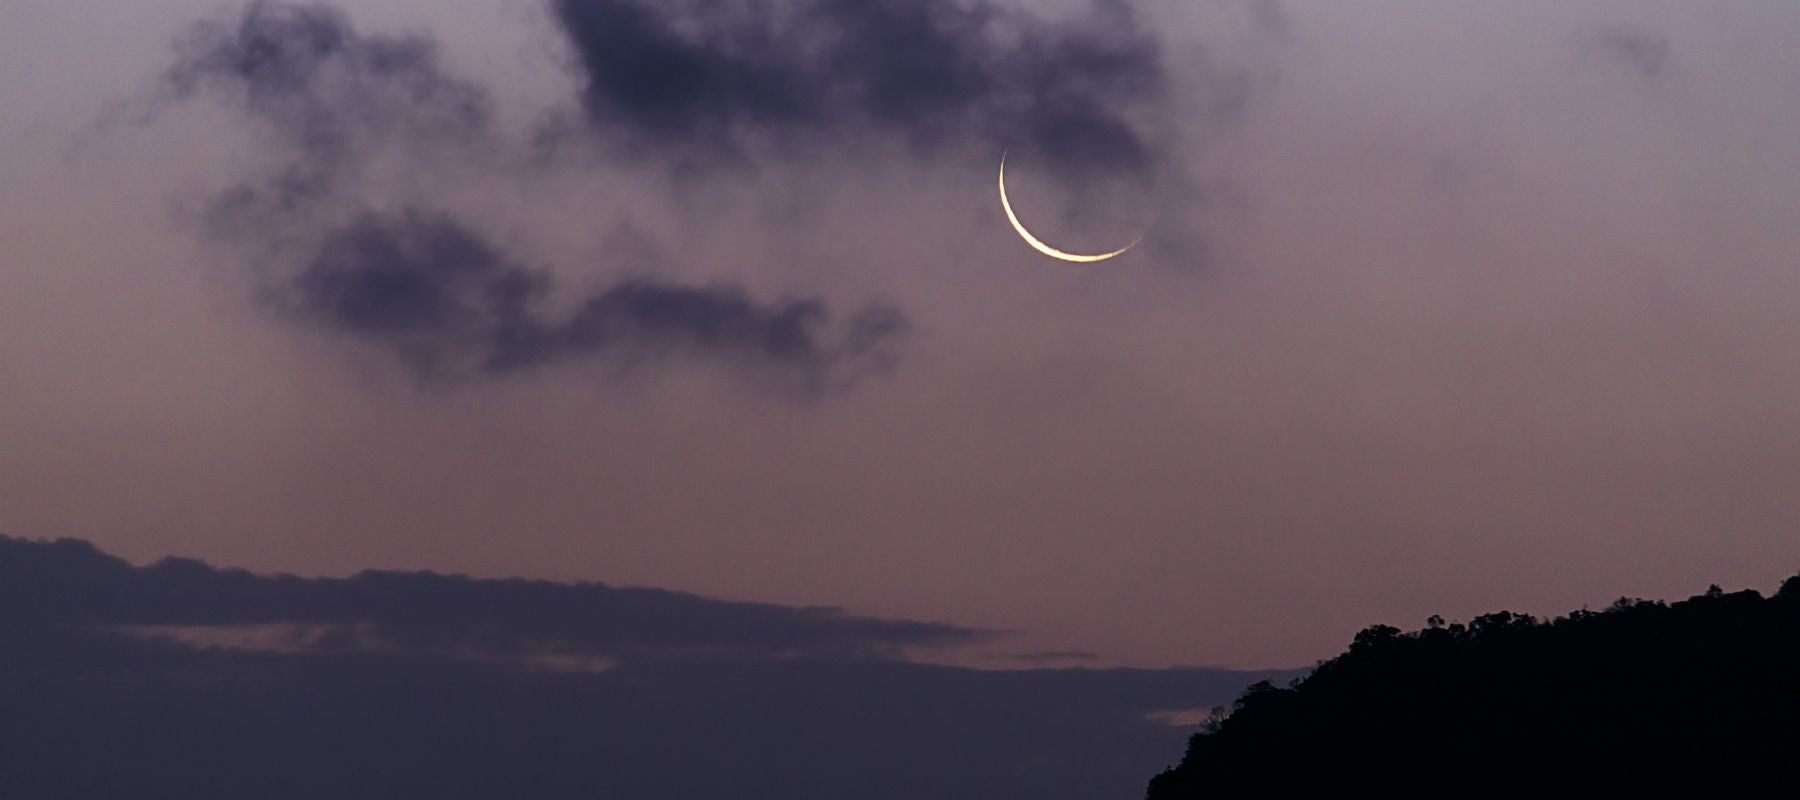 Waning Crescent Moon Phase glowing in the Dusk Sky